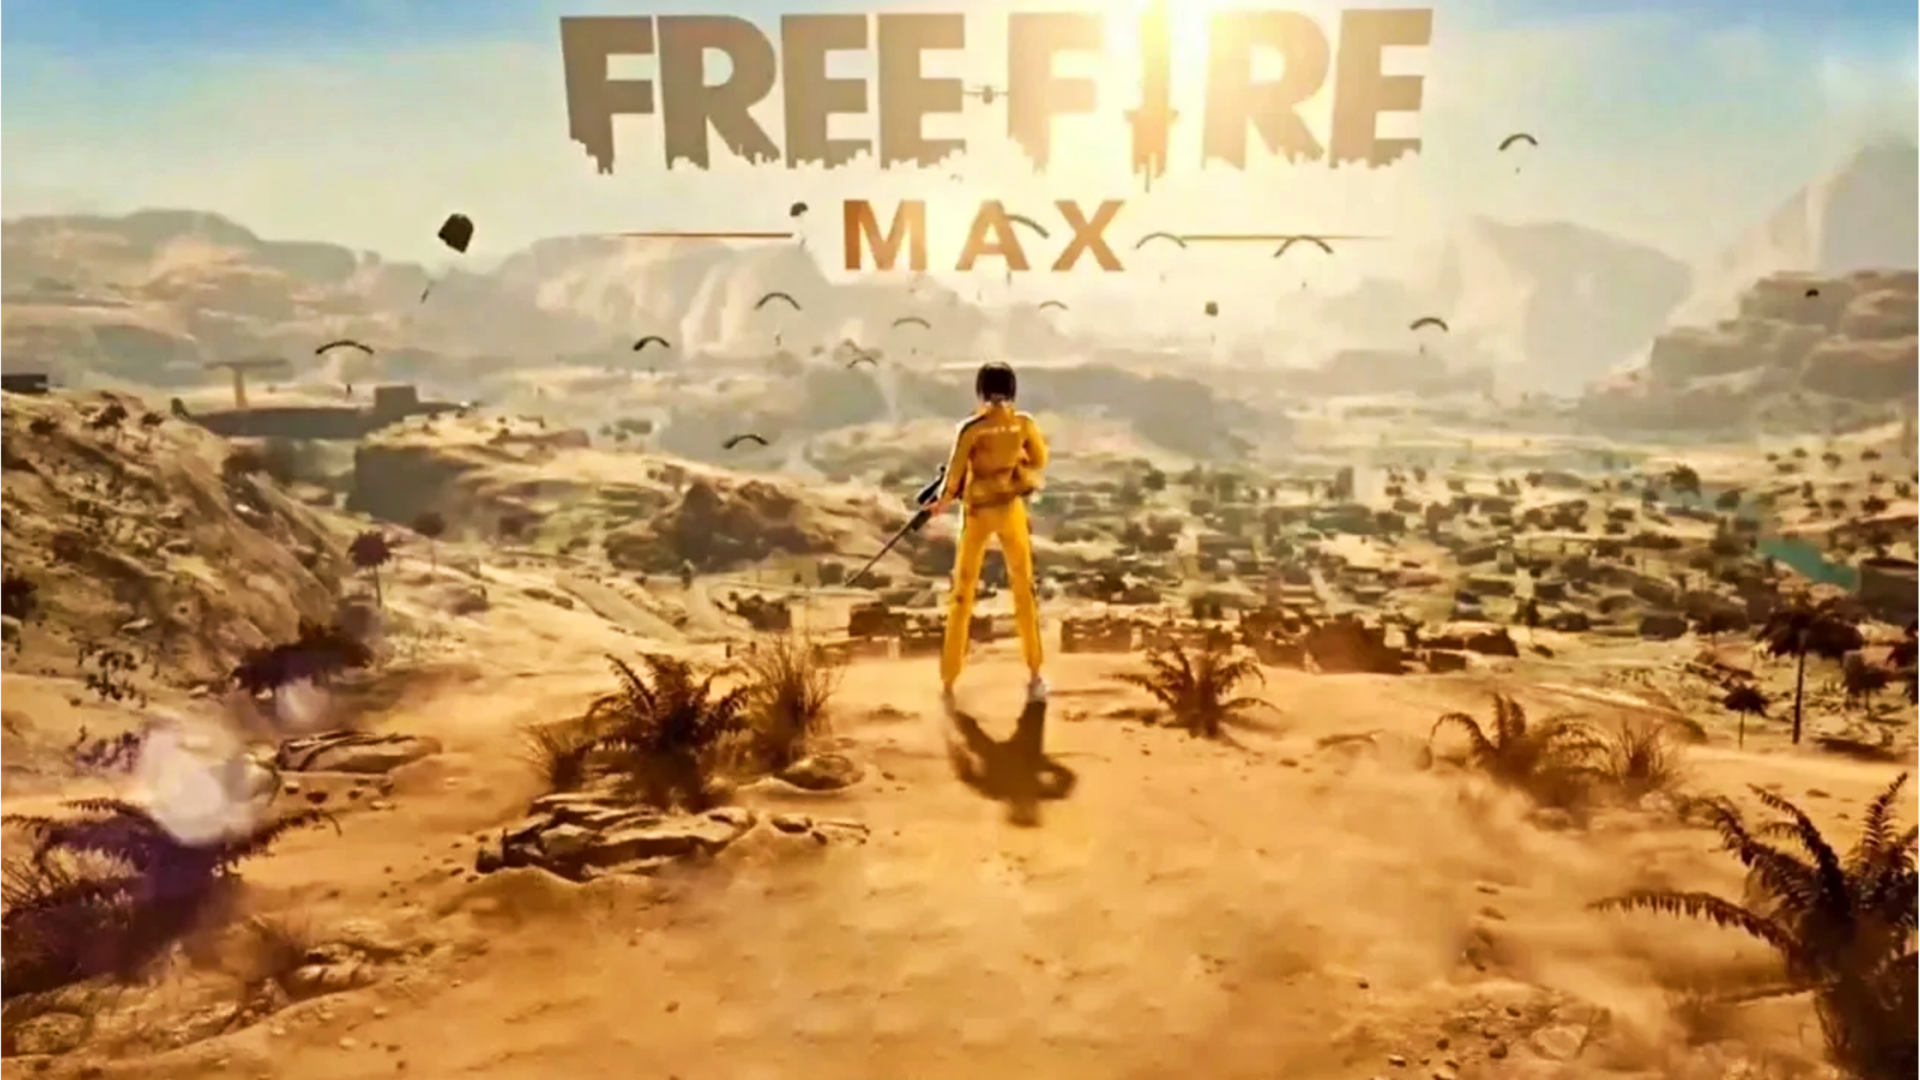 Free Fire MAX codes for December 12: How to redeem?